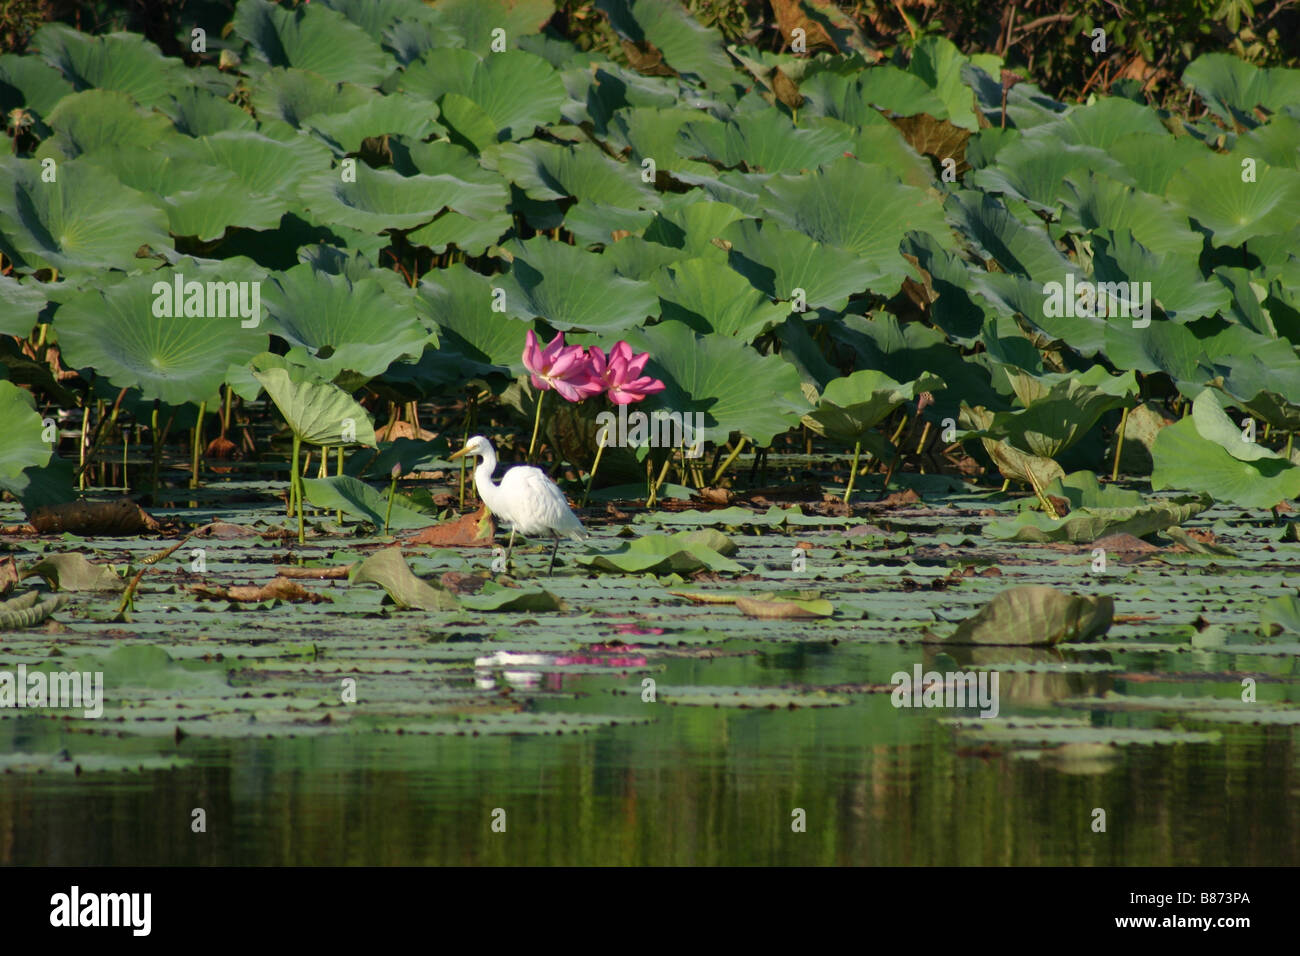 An Intermediate Egret stalks prey along the banks of a billabong in the Northern Territory, Australia Stock Photo